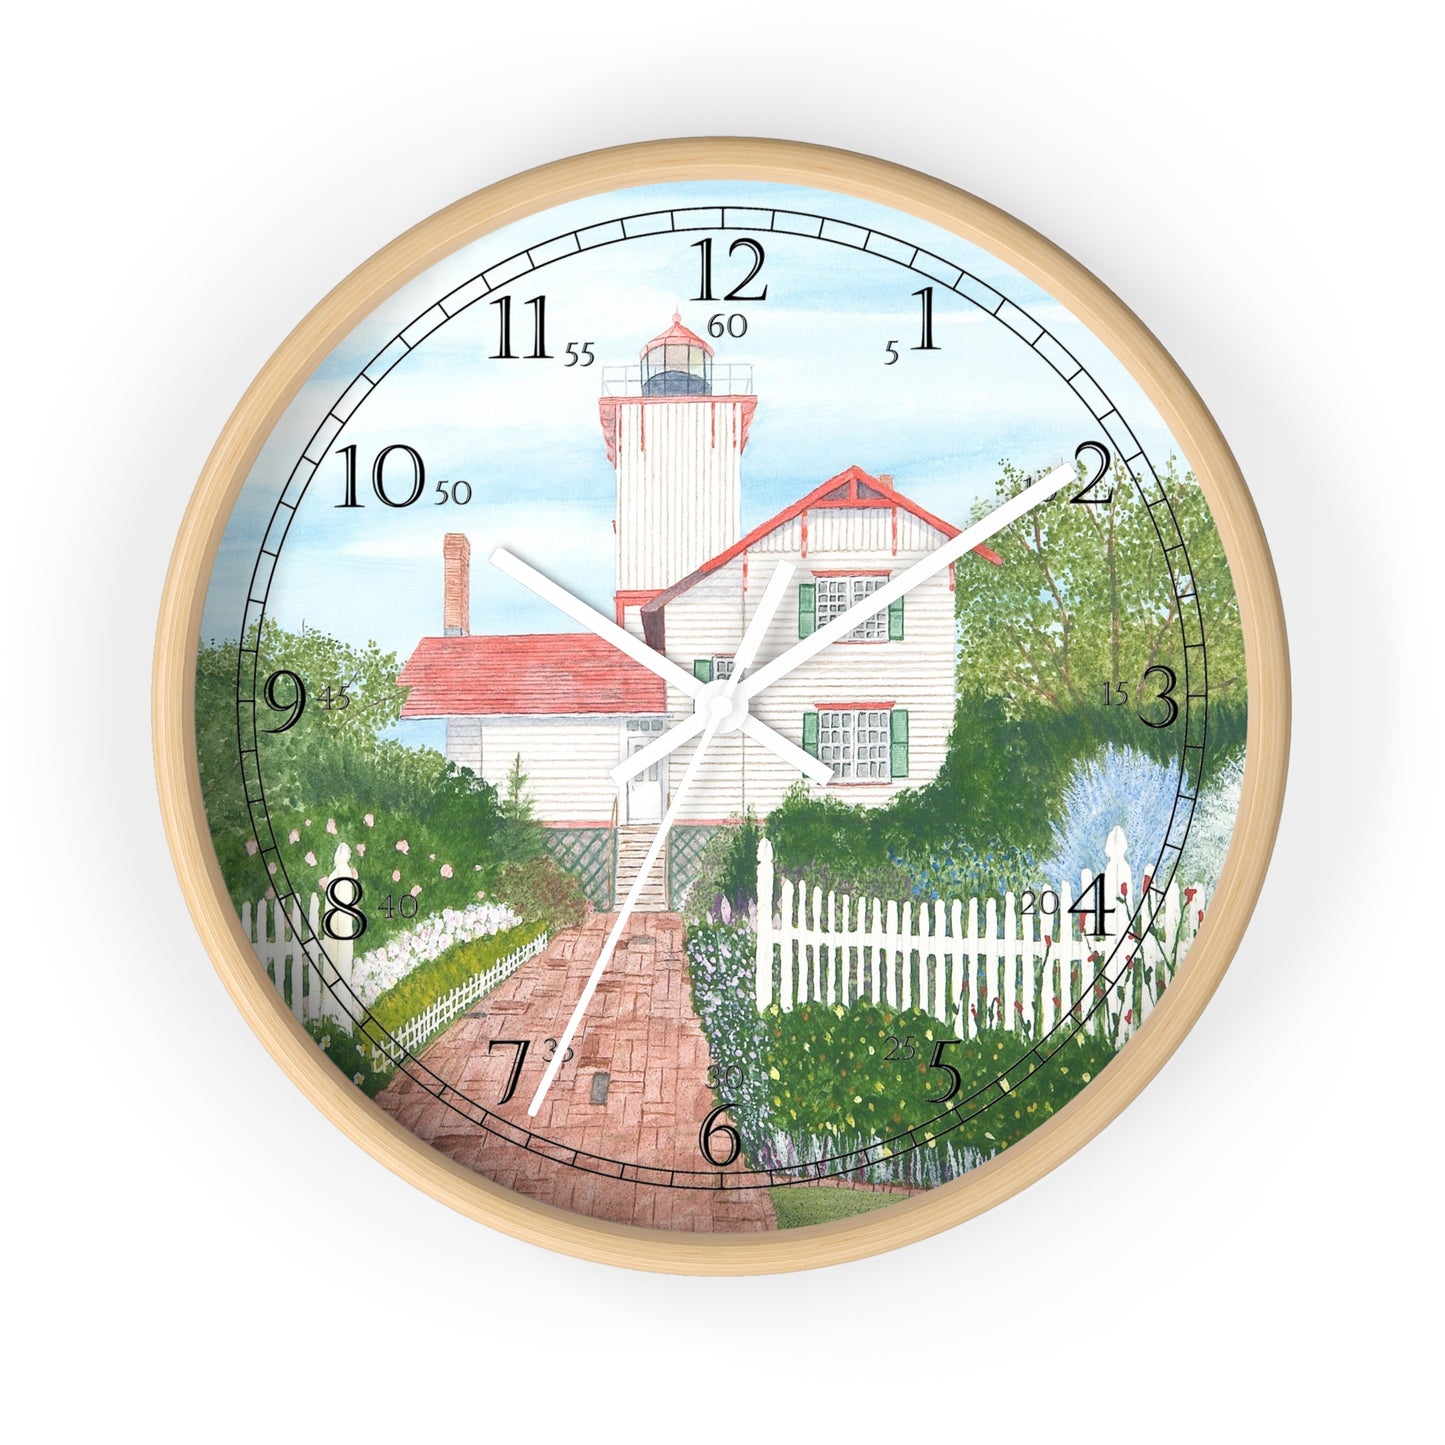 Gardens At Hereford Inlet English Numeral Clock